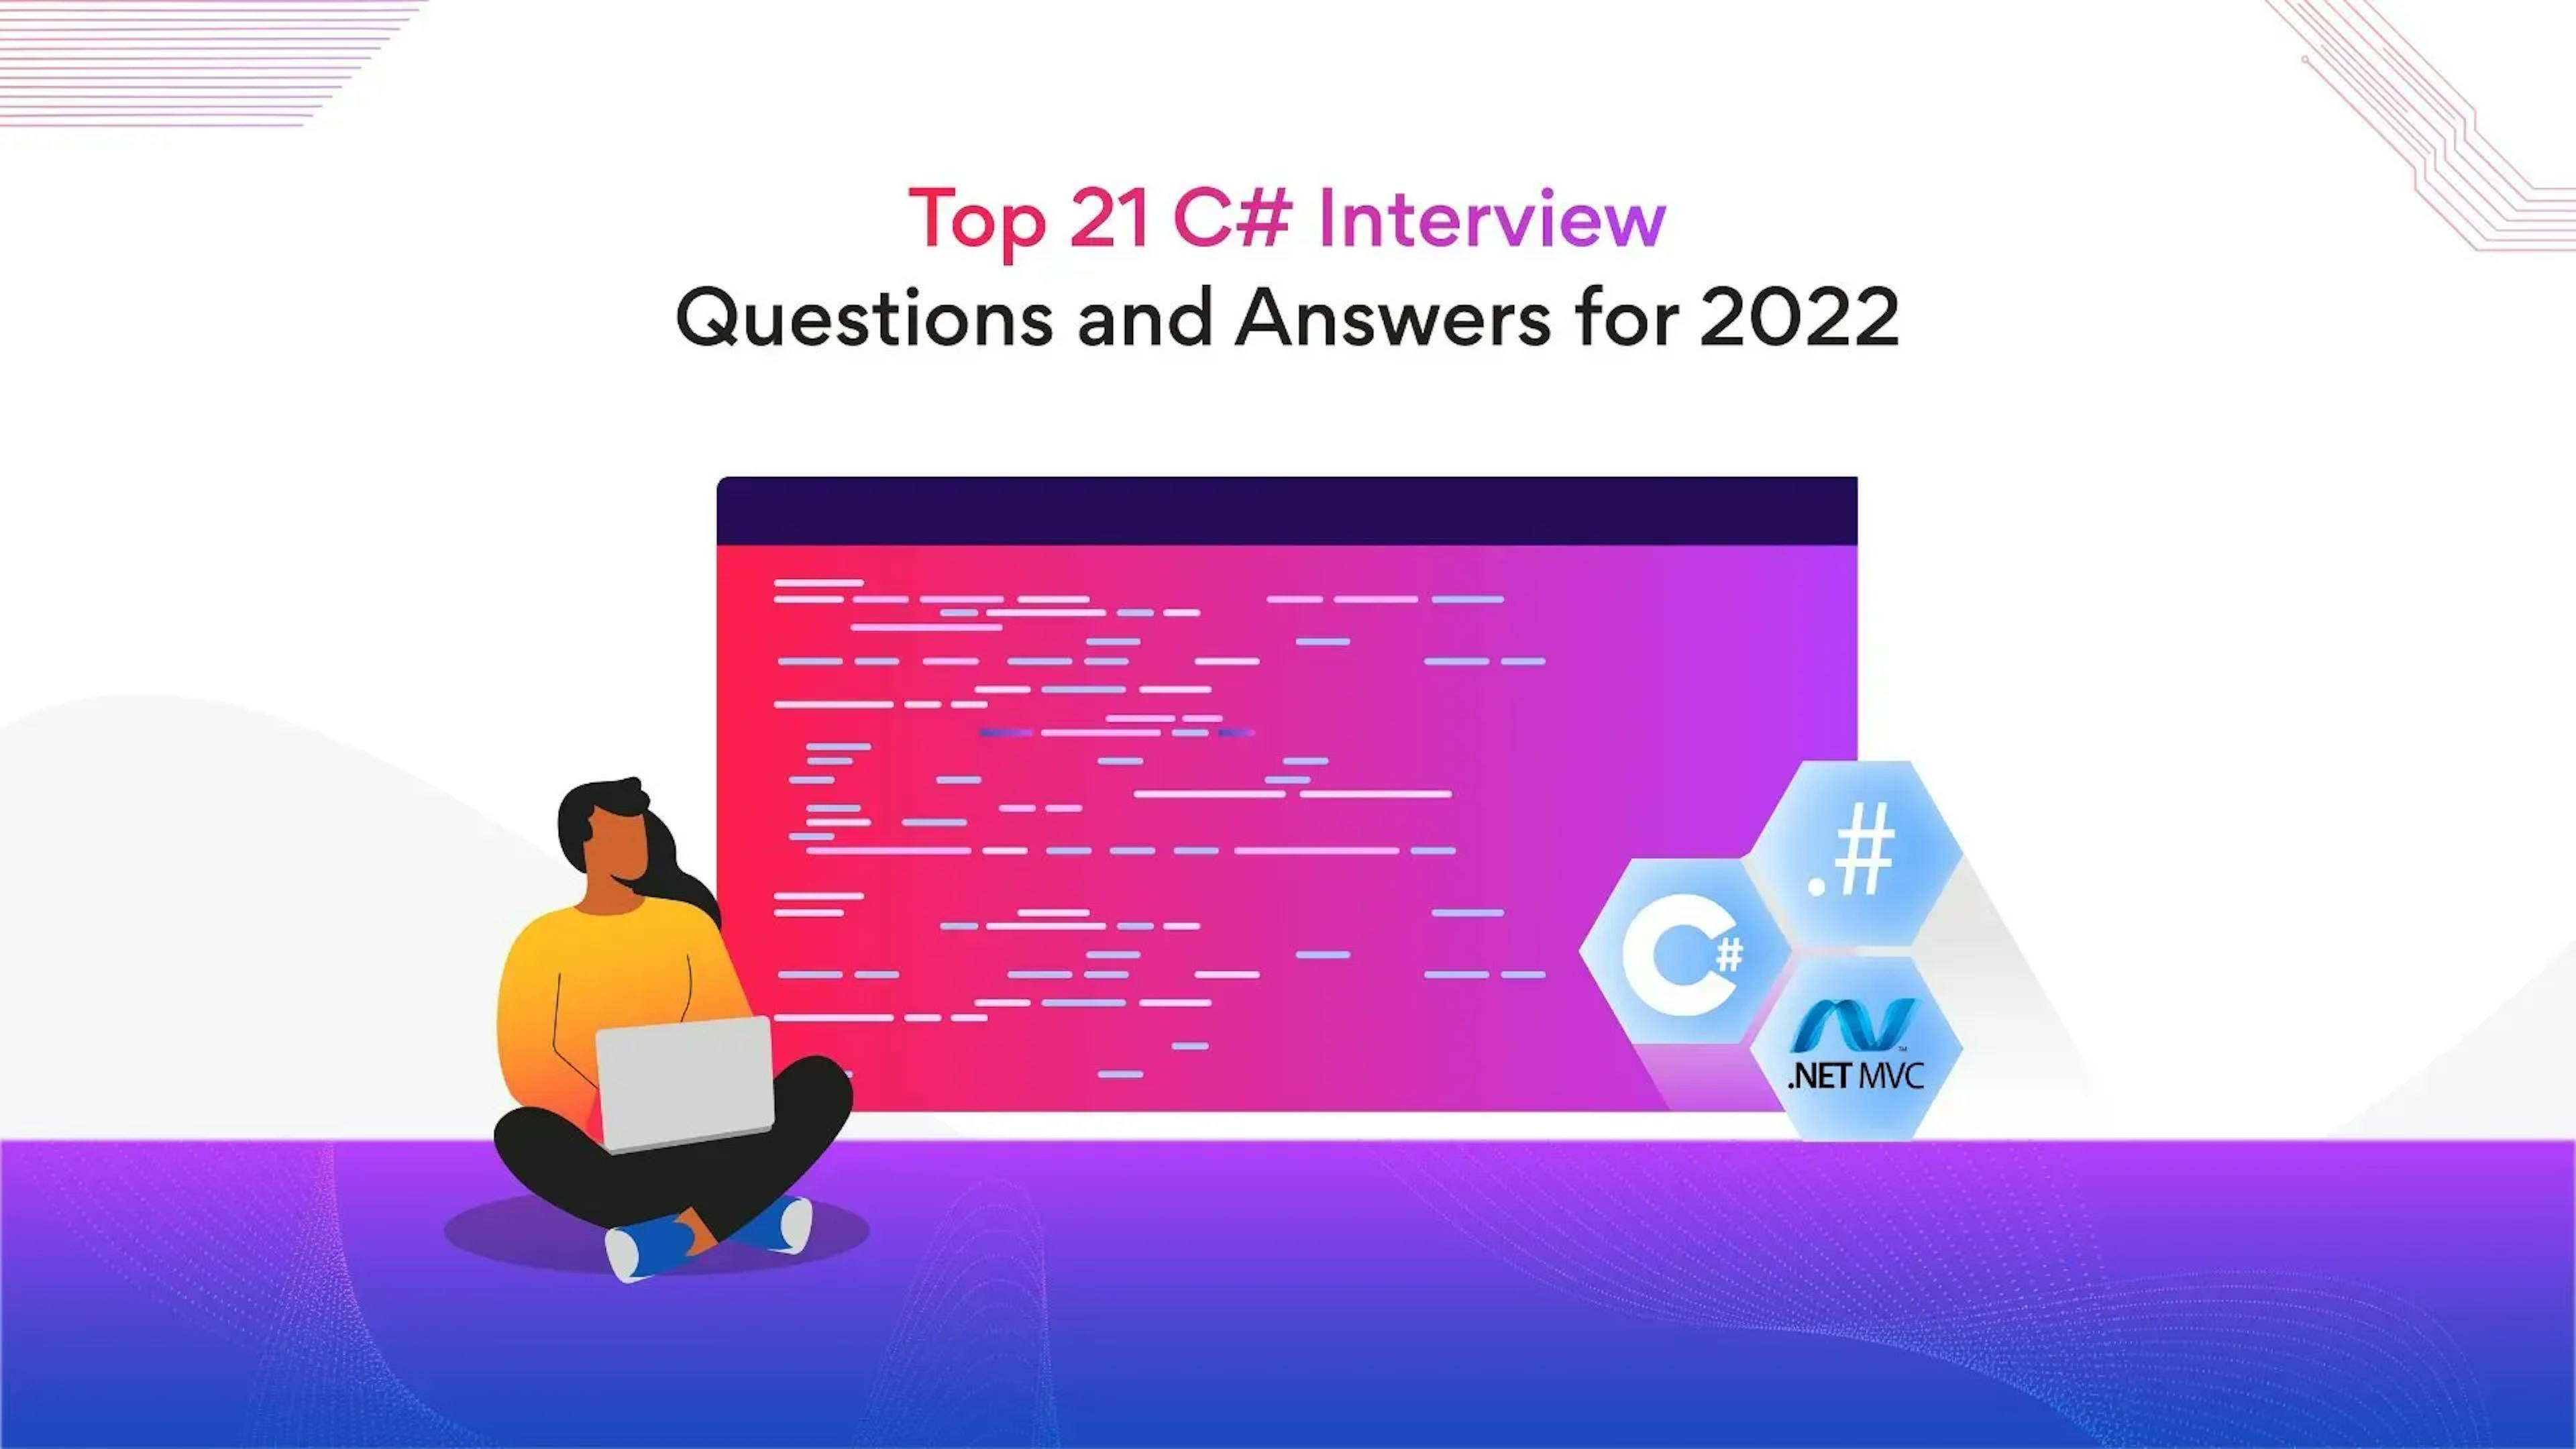 Top 21 C# Interview Questions and Answers 